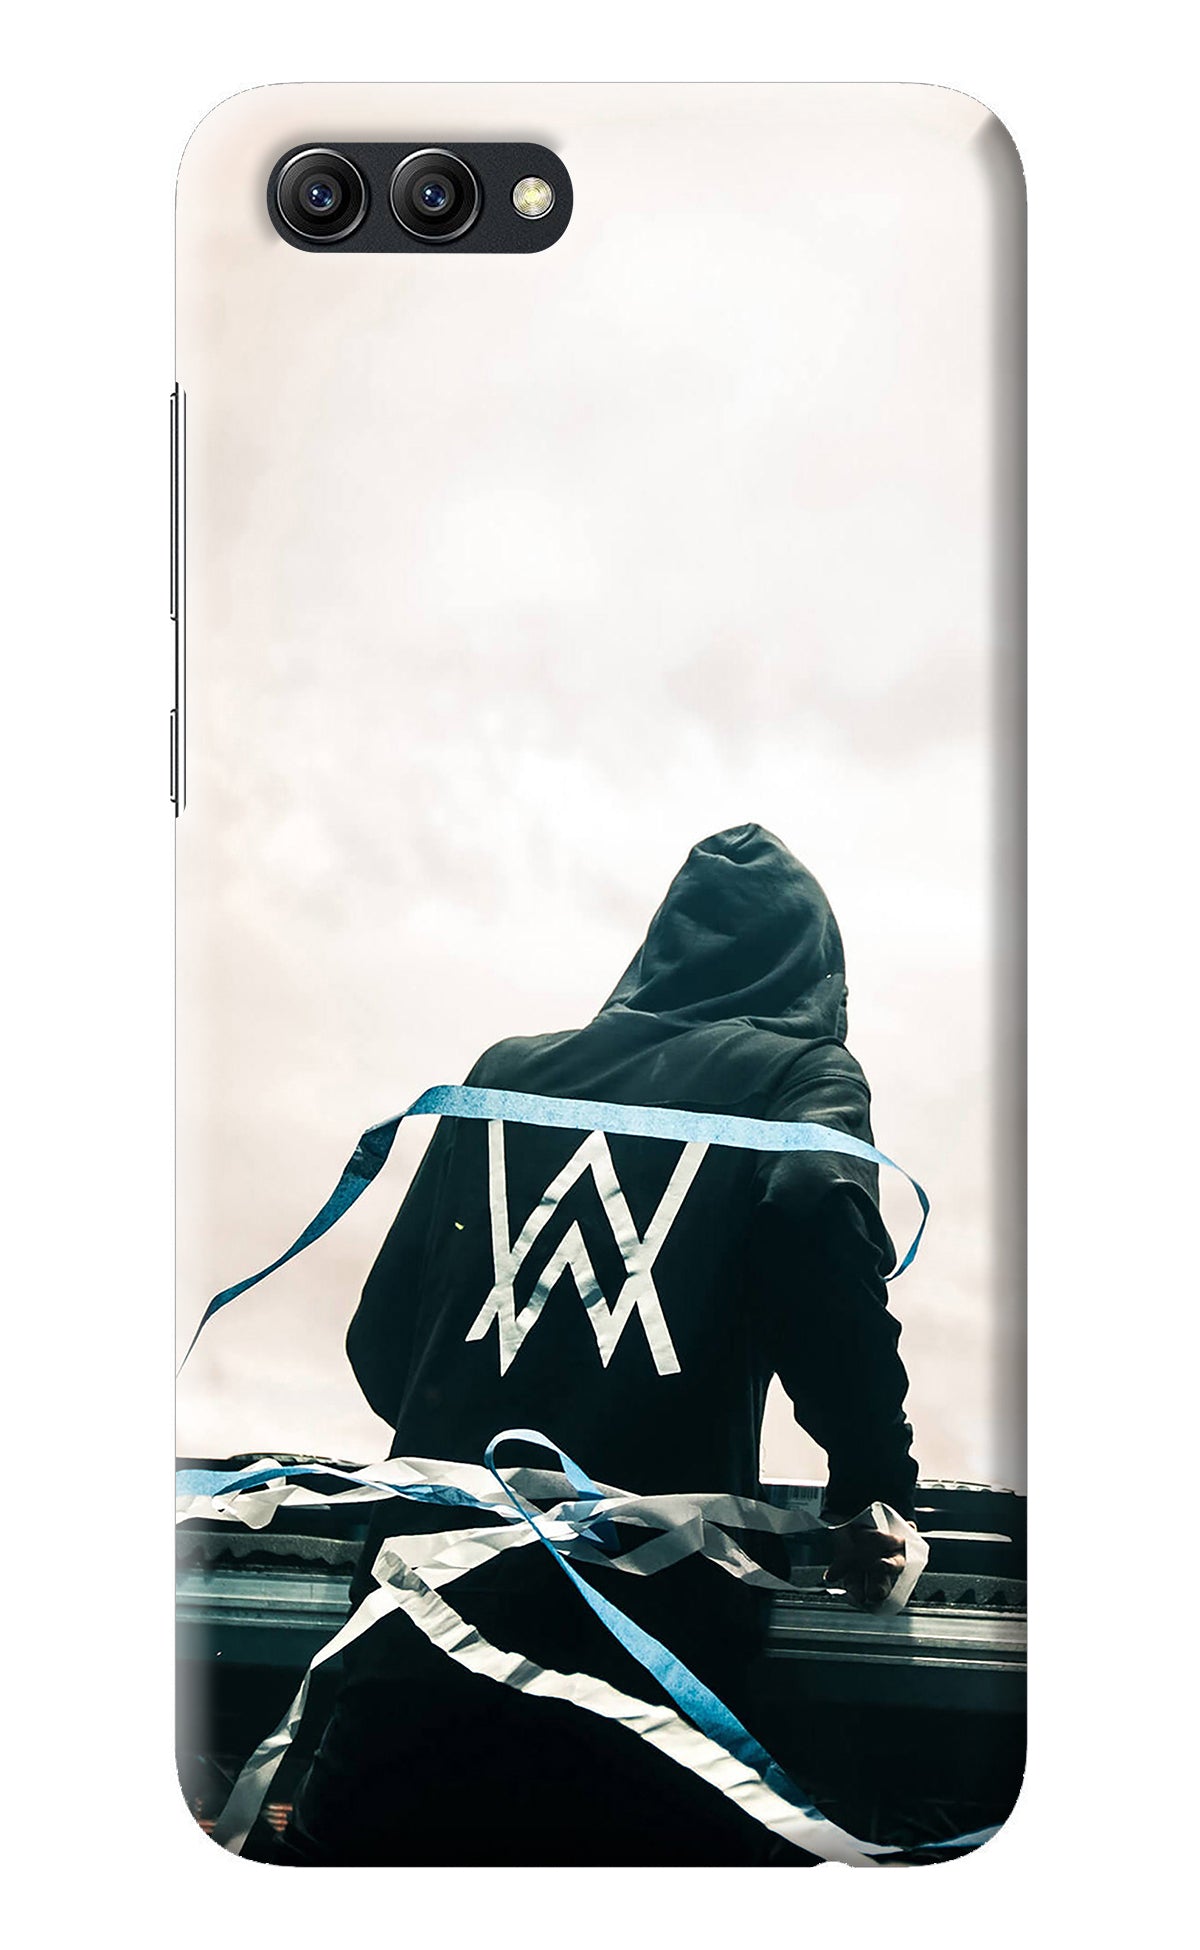 Alan Walker Honor View 10 Back Cover